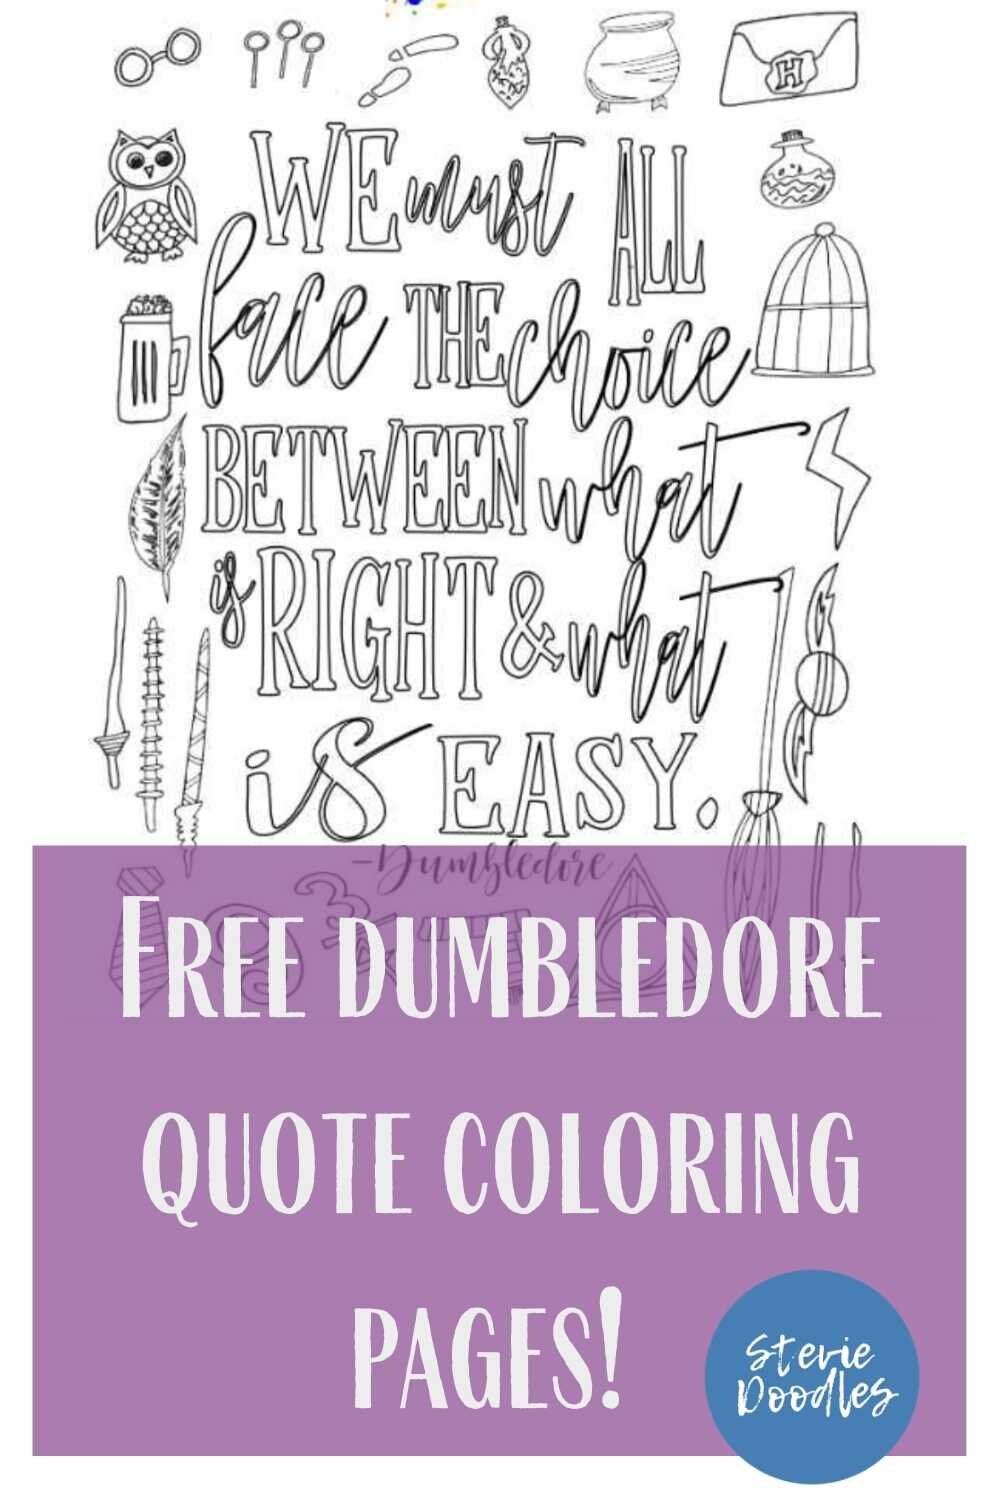 We must all face the choice . . .-Free Dumbledore coloring page - Harry Potter- inspired Over 1000 free pages at Stevie Doodles